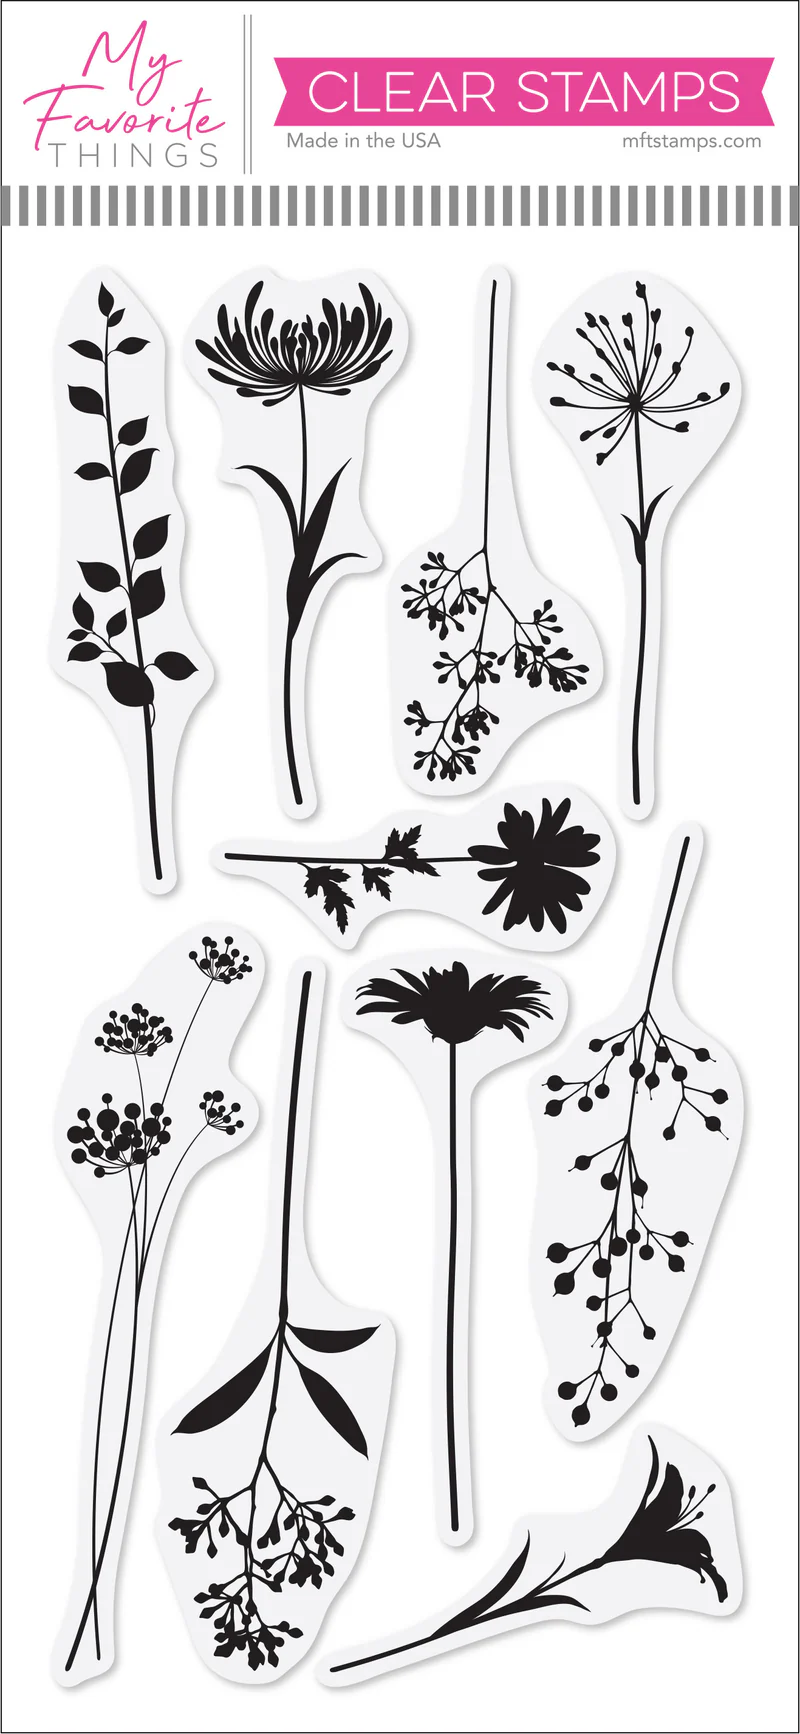 Bild von Flower Silhouettes - Clear Stamps by My Favorite Things